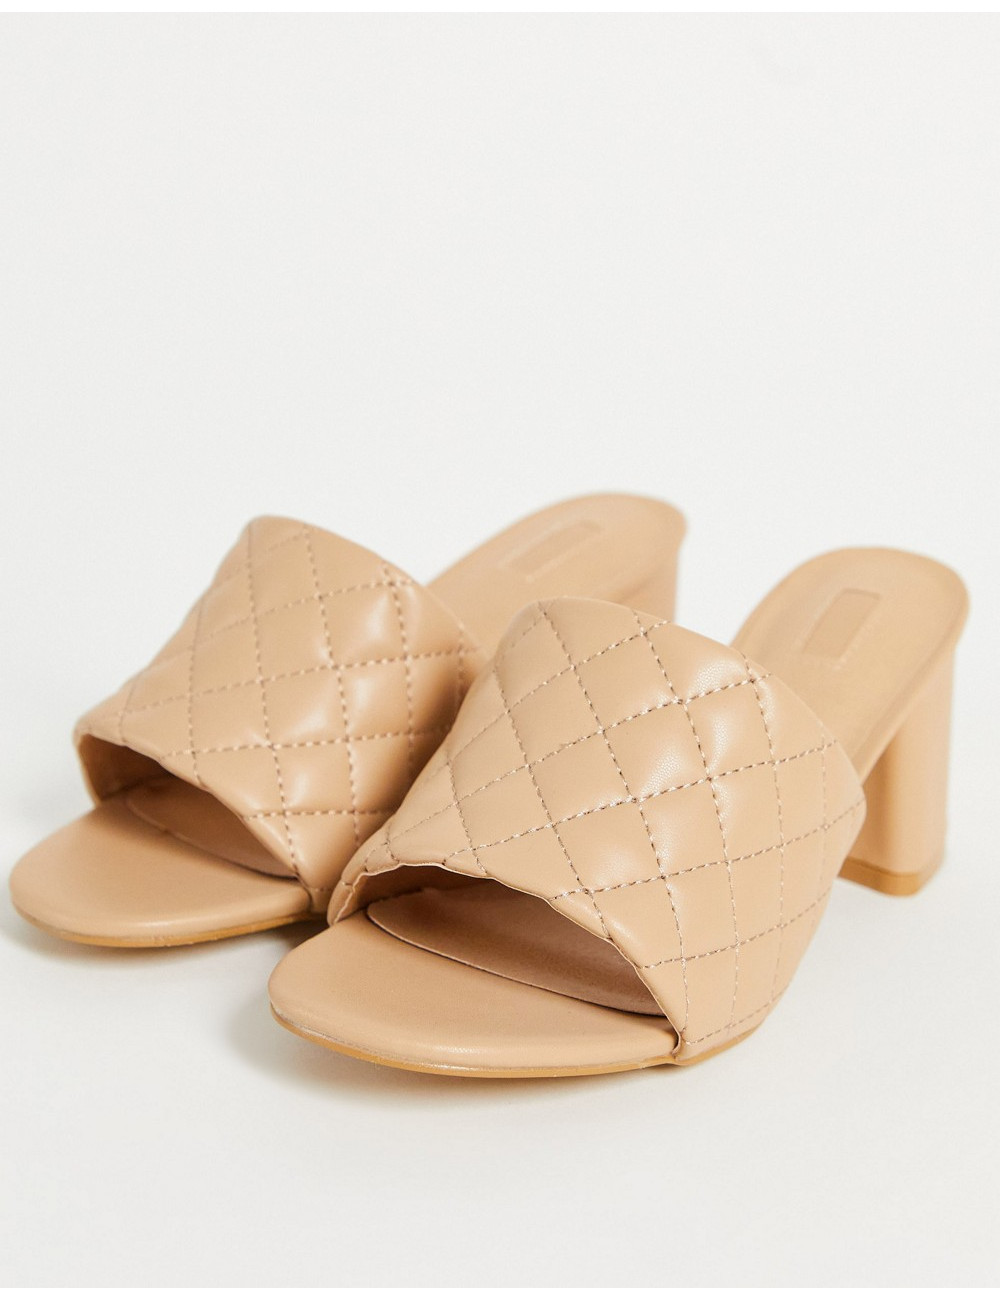 Yours quilted heeled mules...